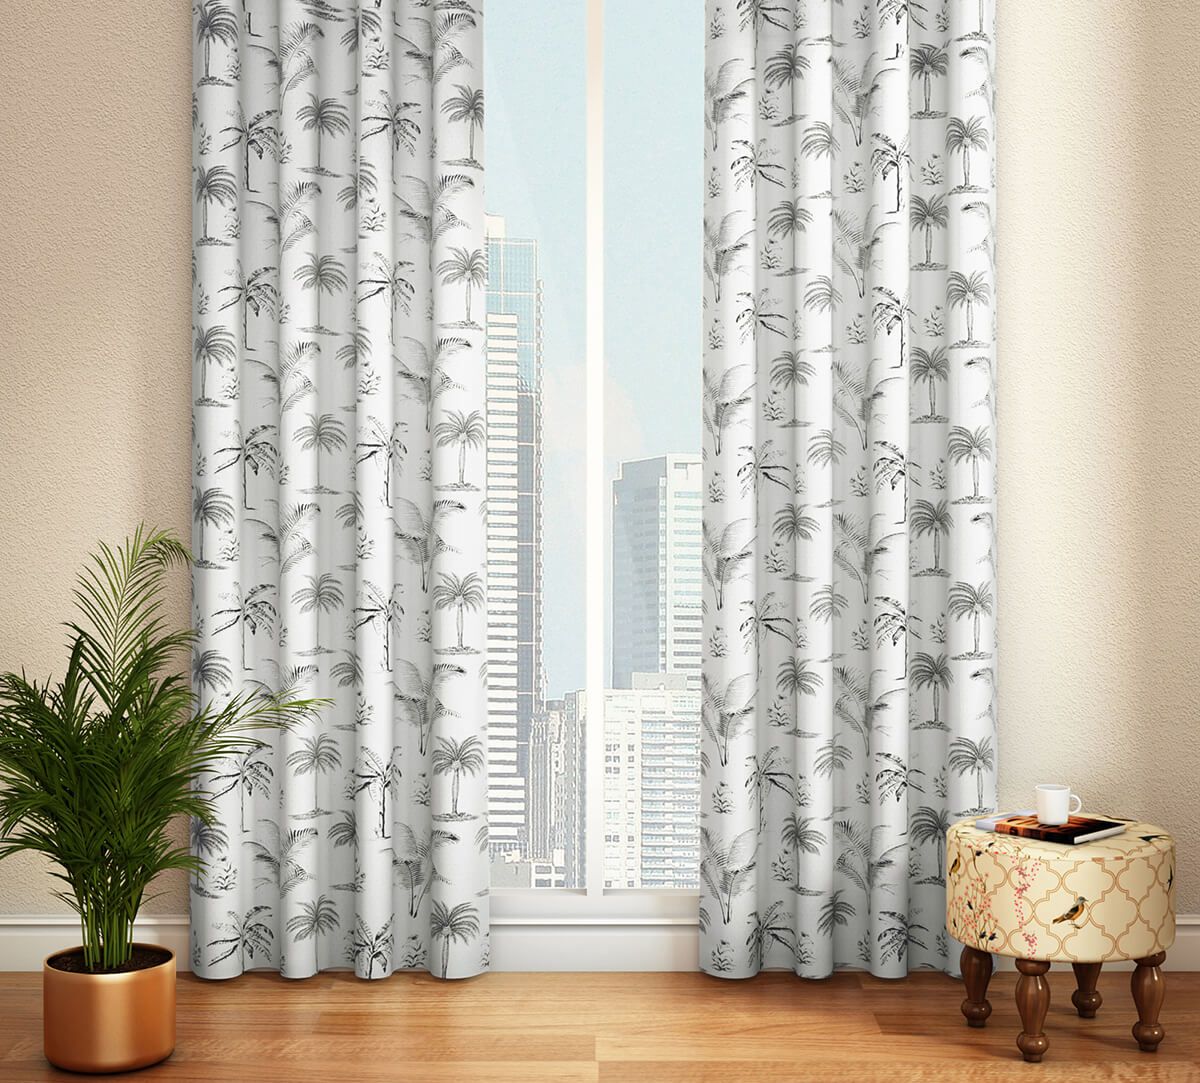 Buy affordable door curtains online | India Cirrcus